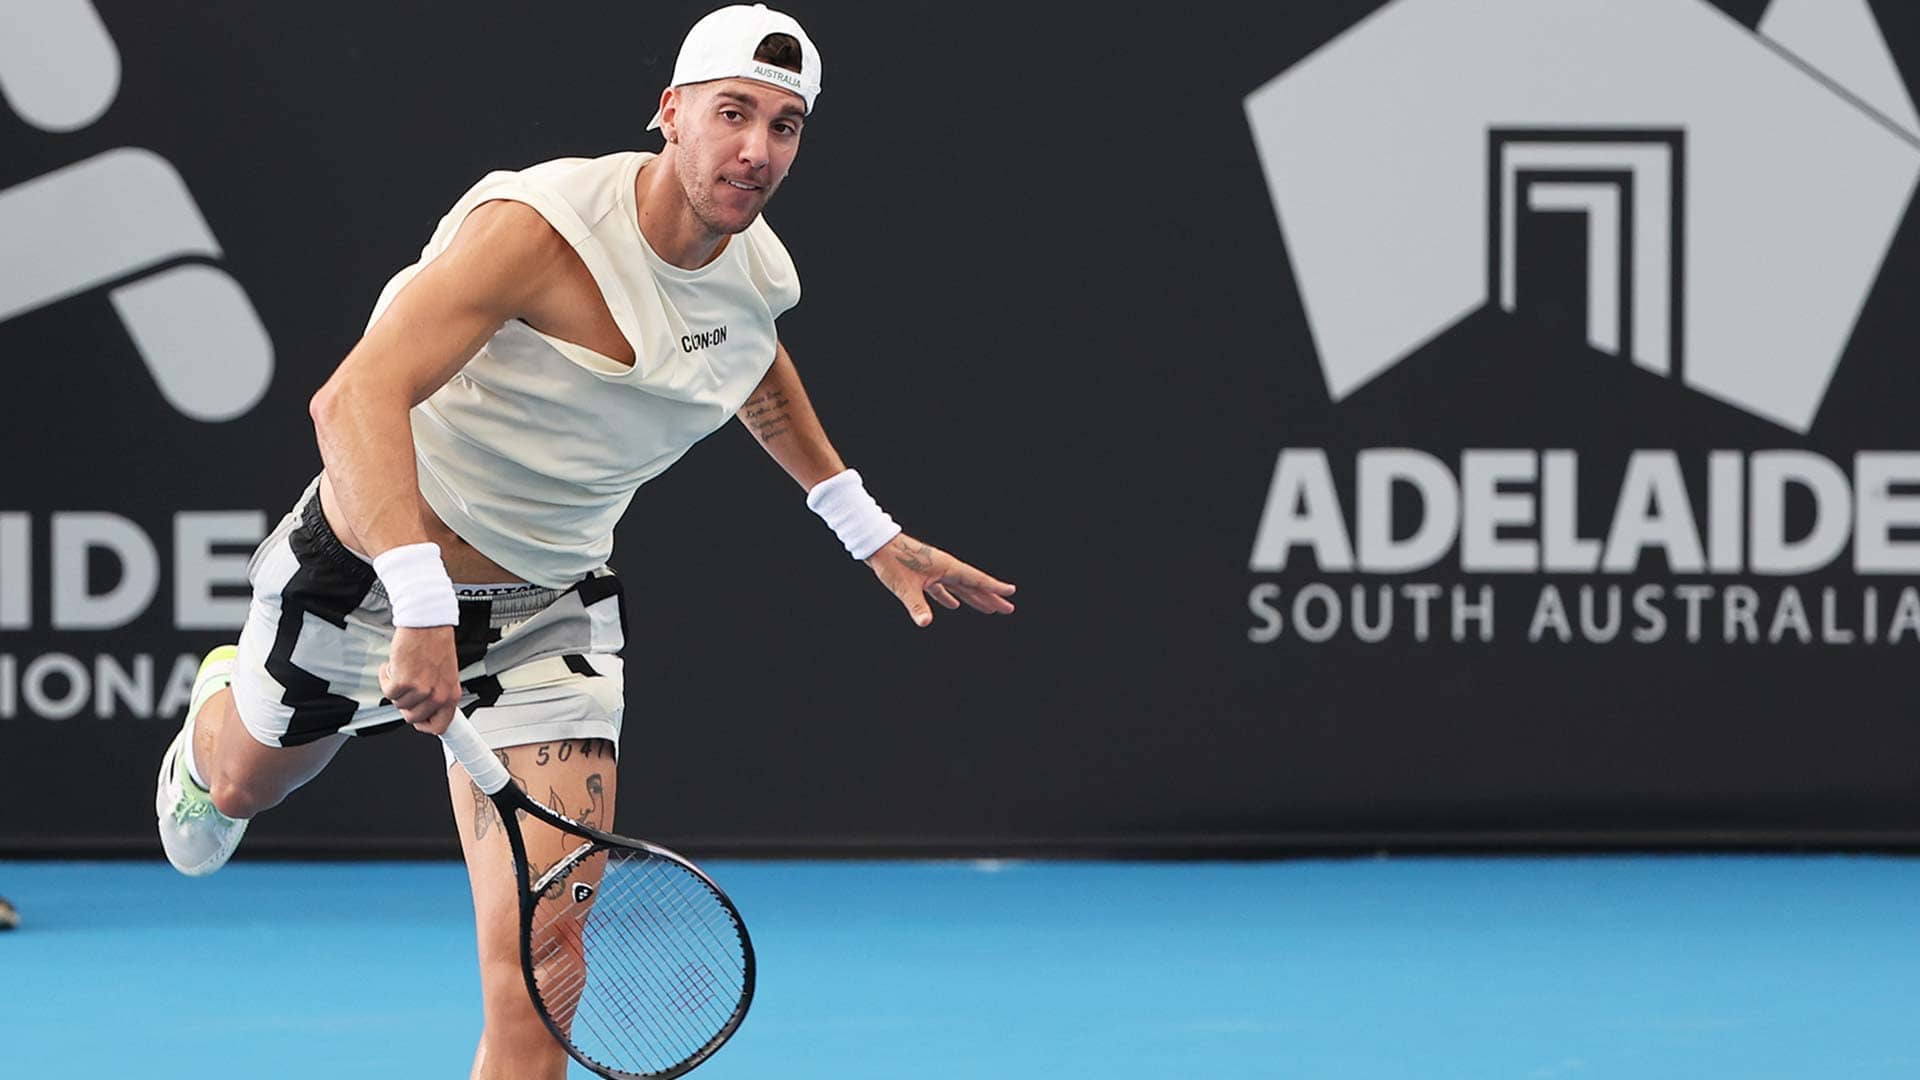 Thanasi Kokkinakis won his first tour-level title in Adelaide in 2022.